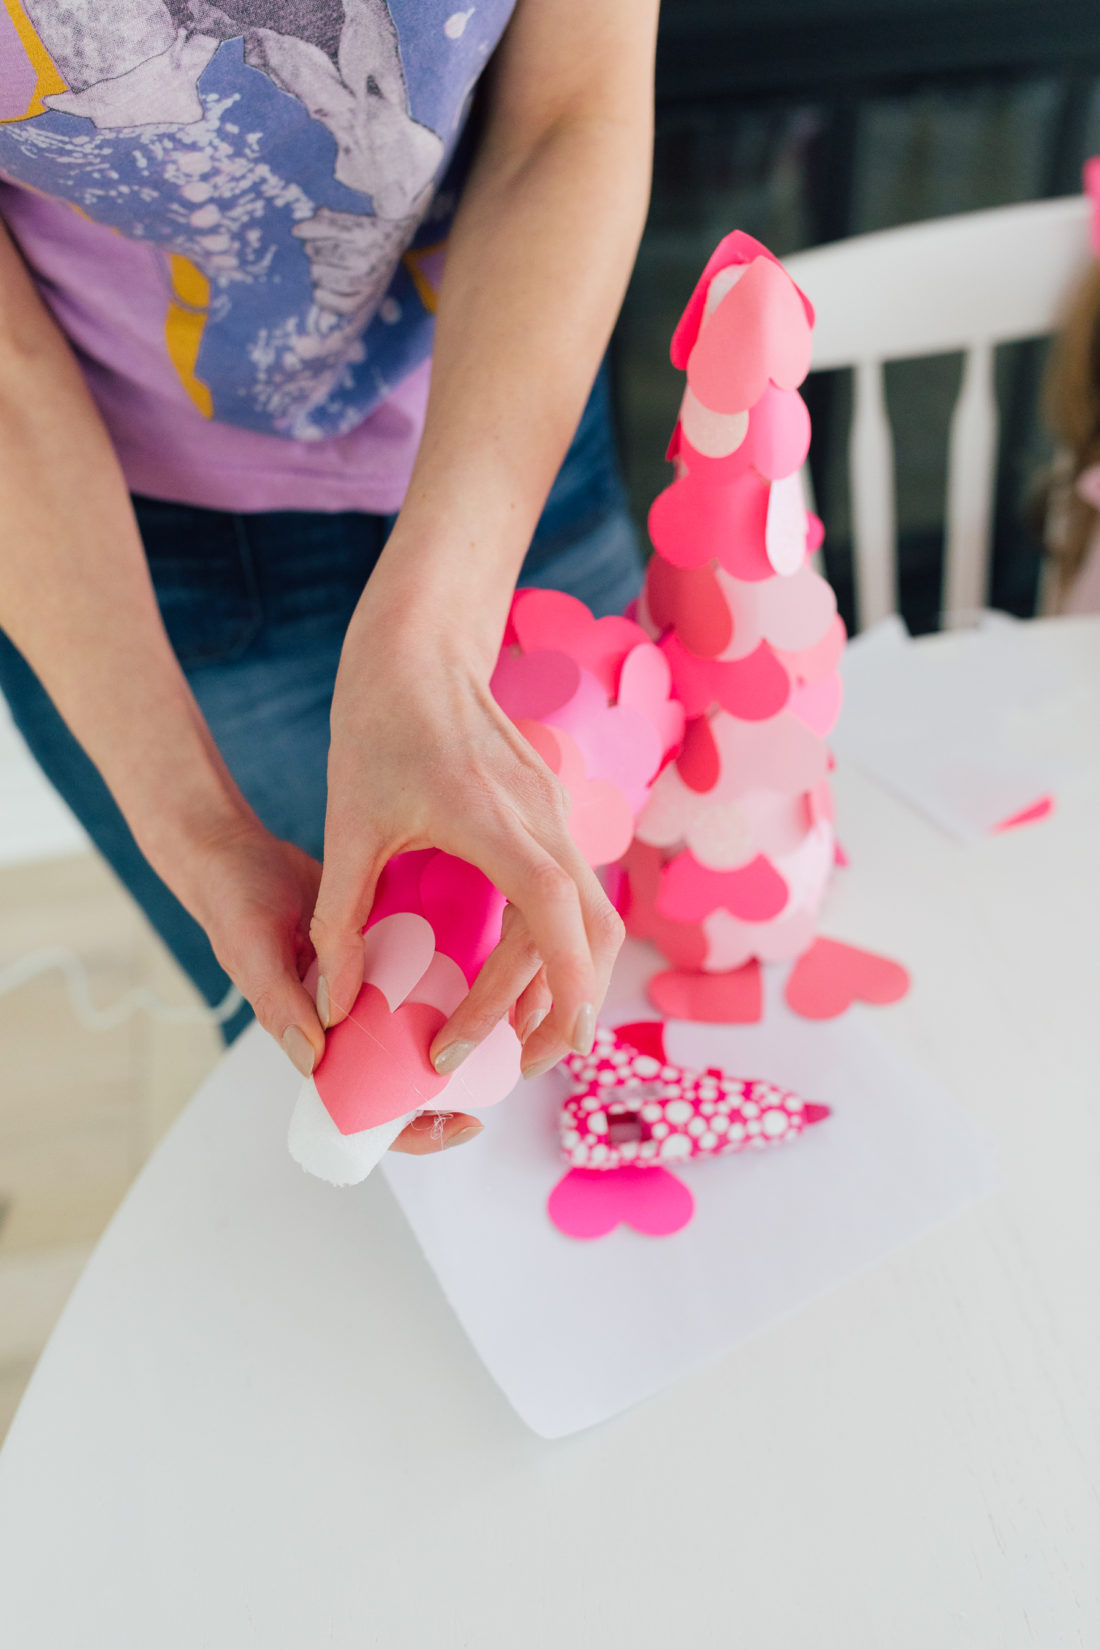 Eva Amurri Martino affixes ombre pink hearts to a foam tree base as part of a valentine's day craft